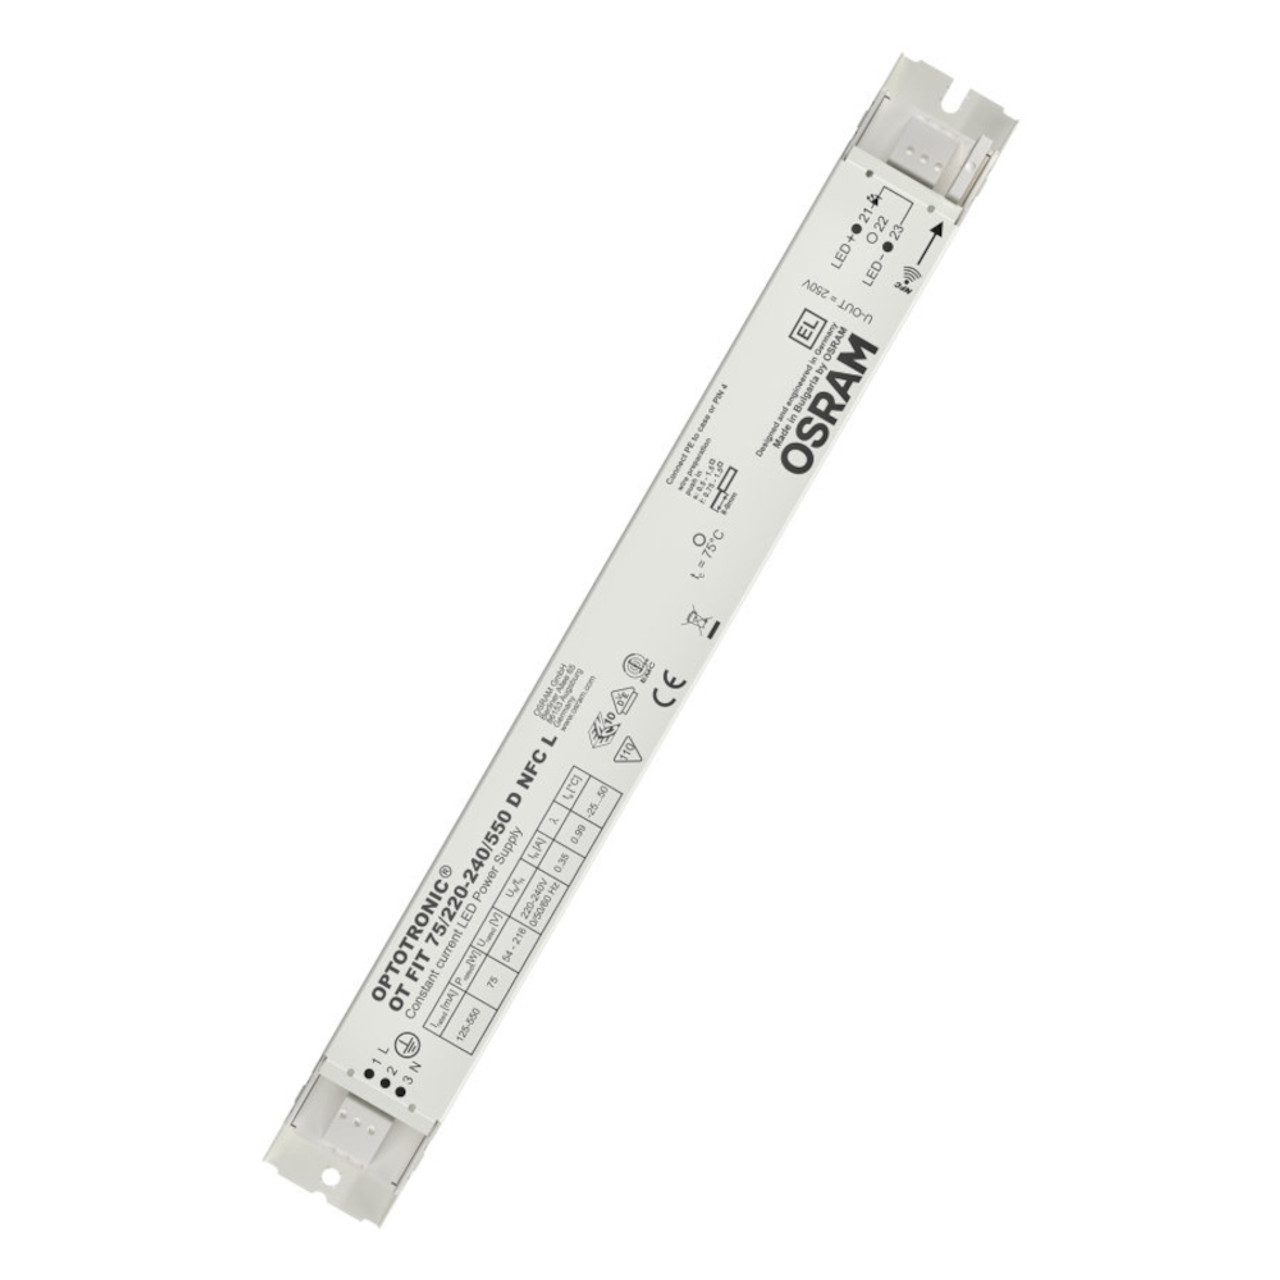 Osram OT FIT Constant Current Linear LED Driver 25W 170-500mA NFC